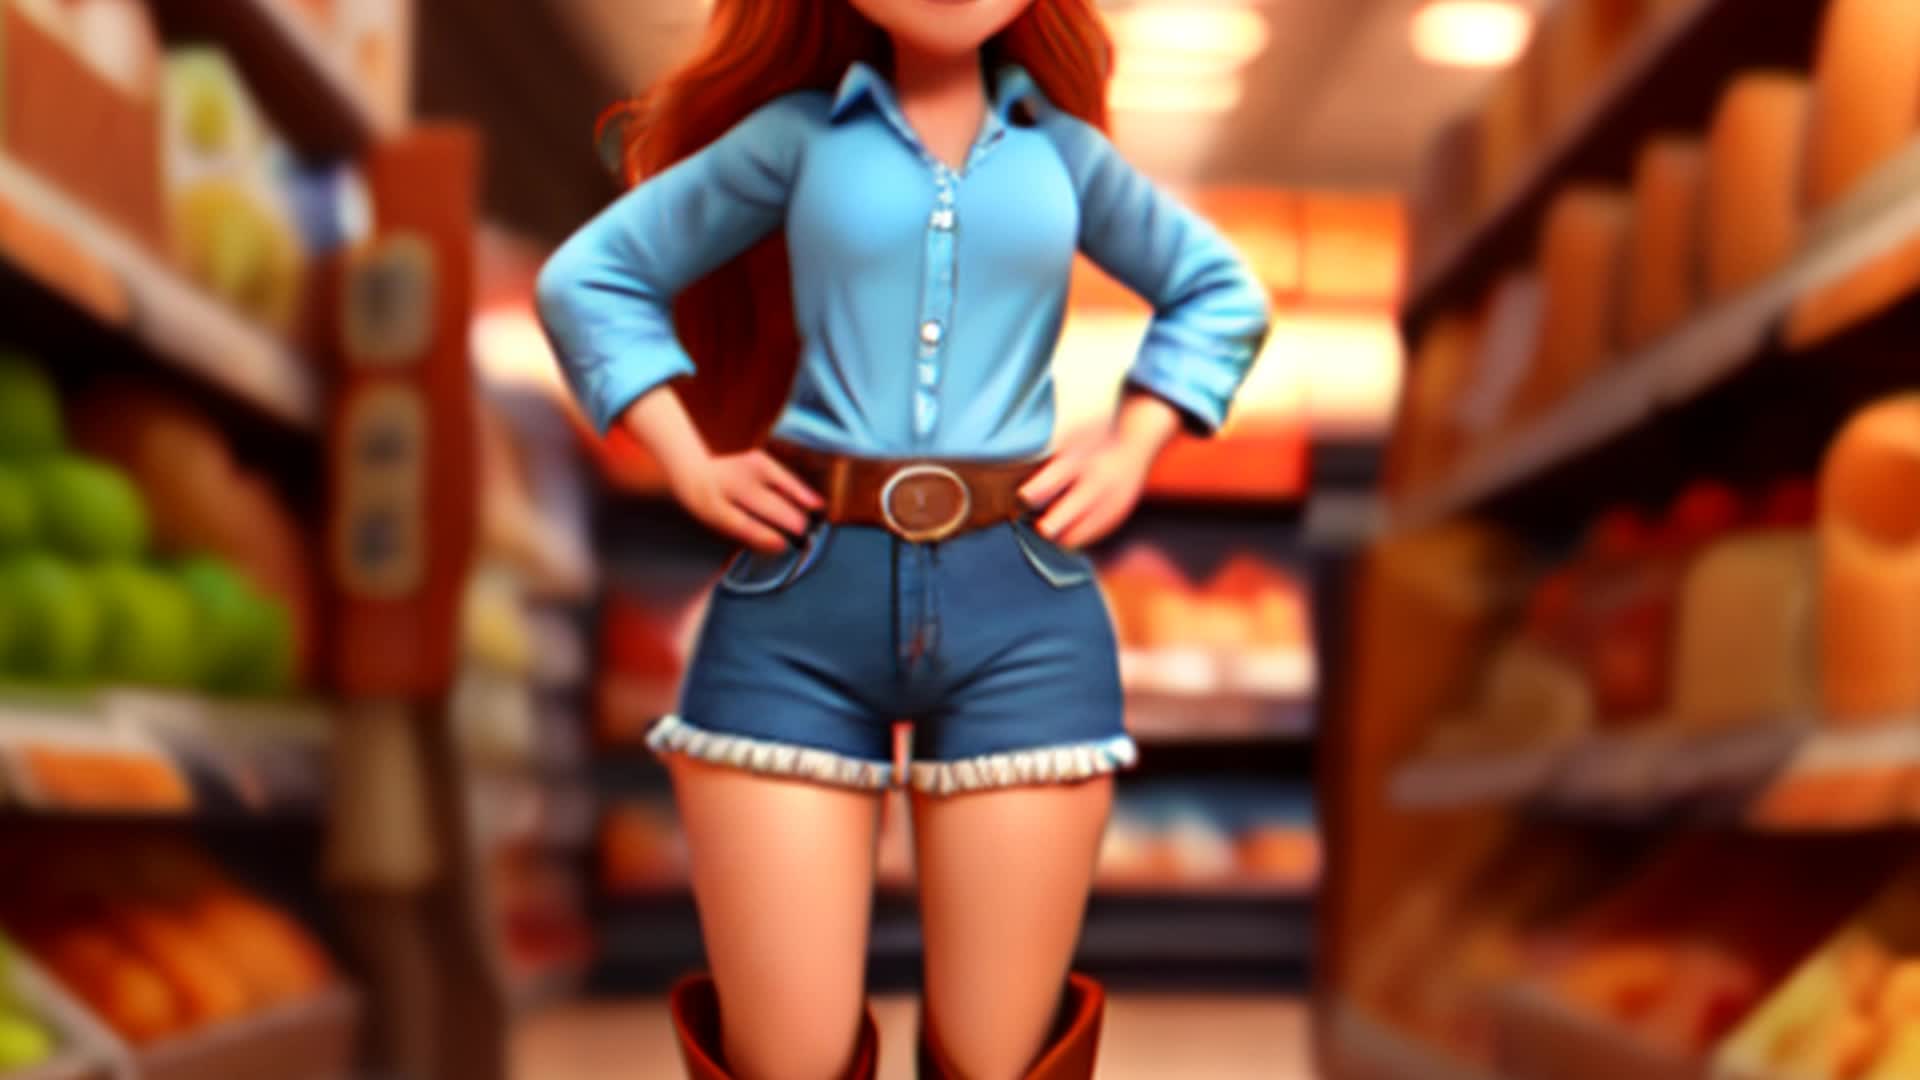 Confident woman in denim shorts, thigh-high boots, approaching man in silk shirt, cowboy boots in grocery aisle, cheeky expression, soft shadows, close-up